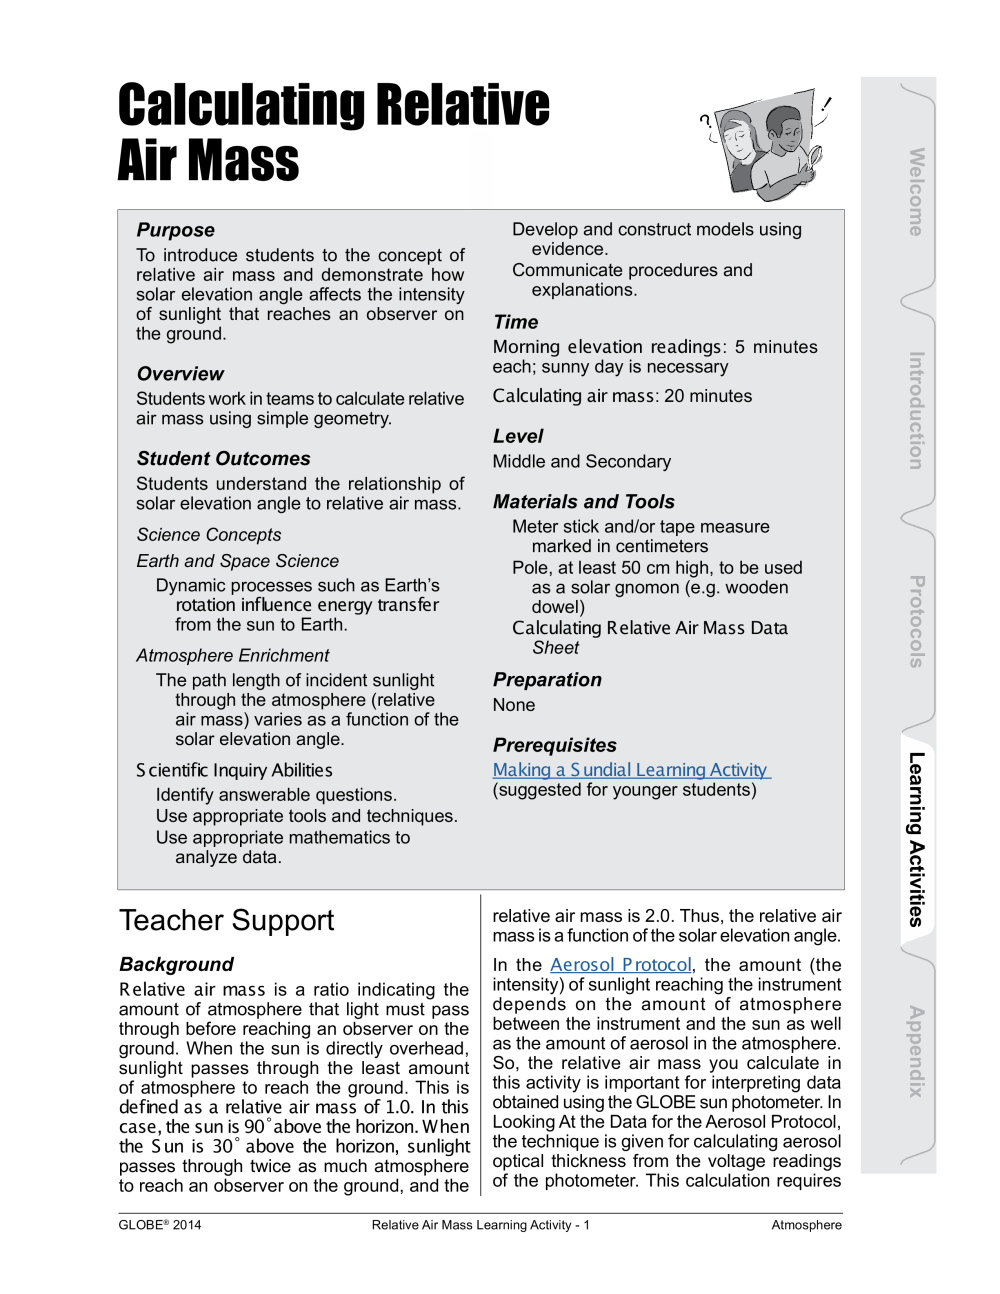 Learning Activities preview for Calculating Relative Air Mass